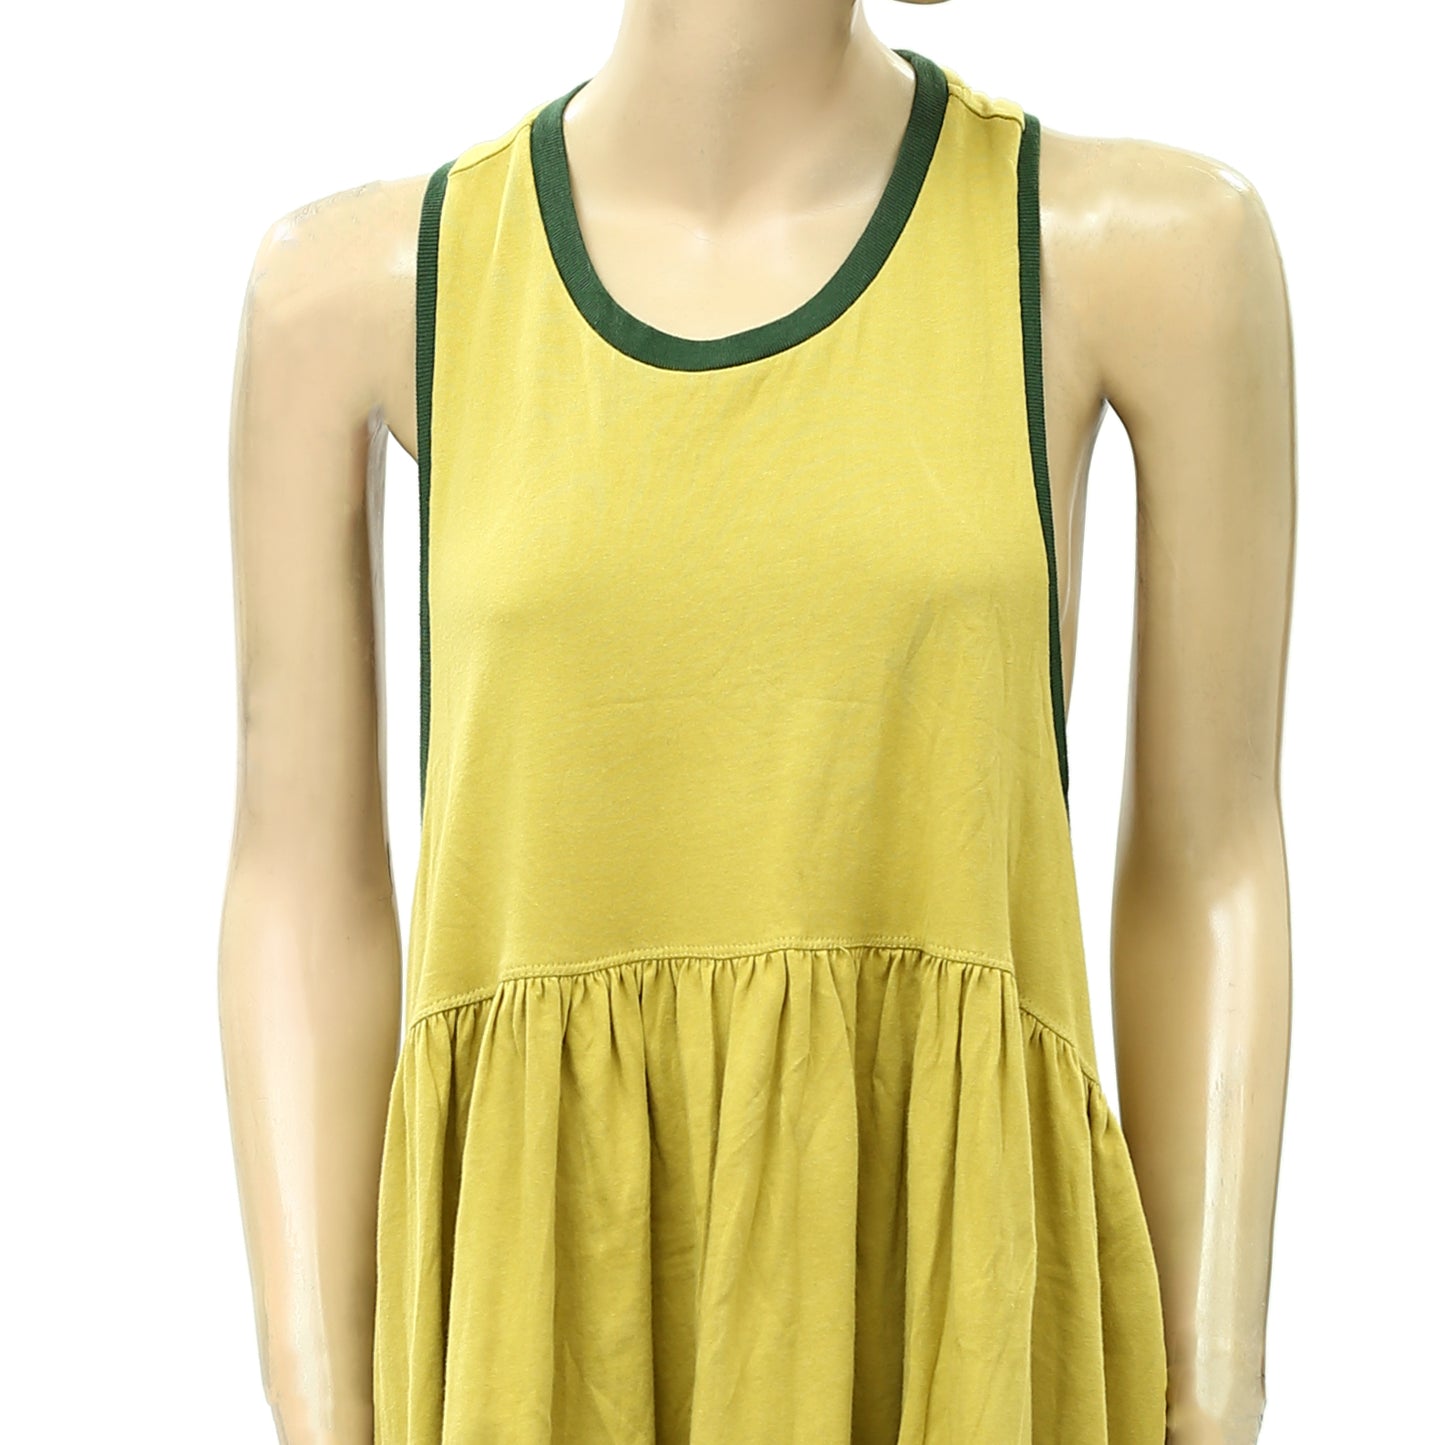 Urban Outfitters UO Hadley Contrast High & Low Mini Dress